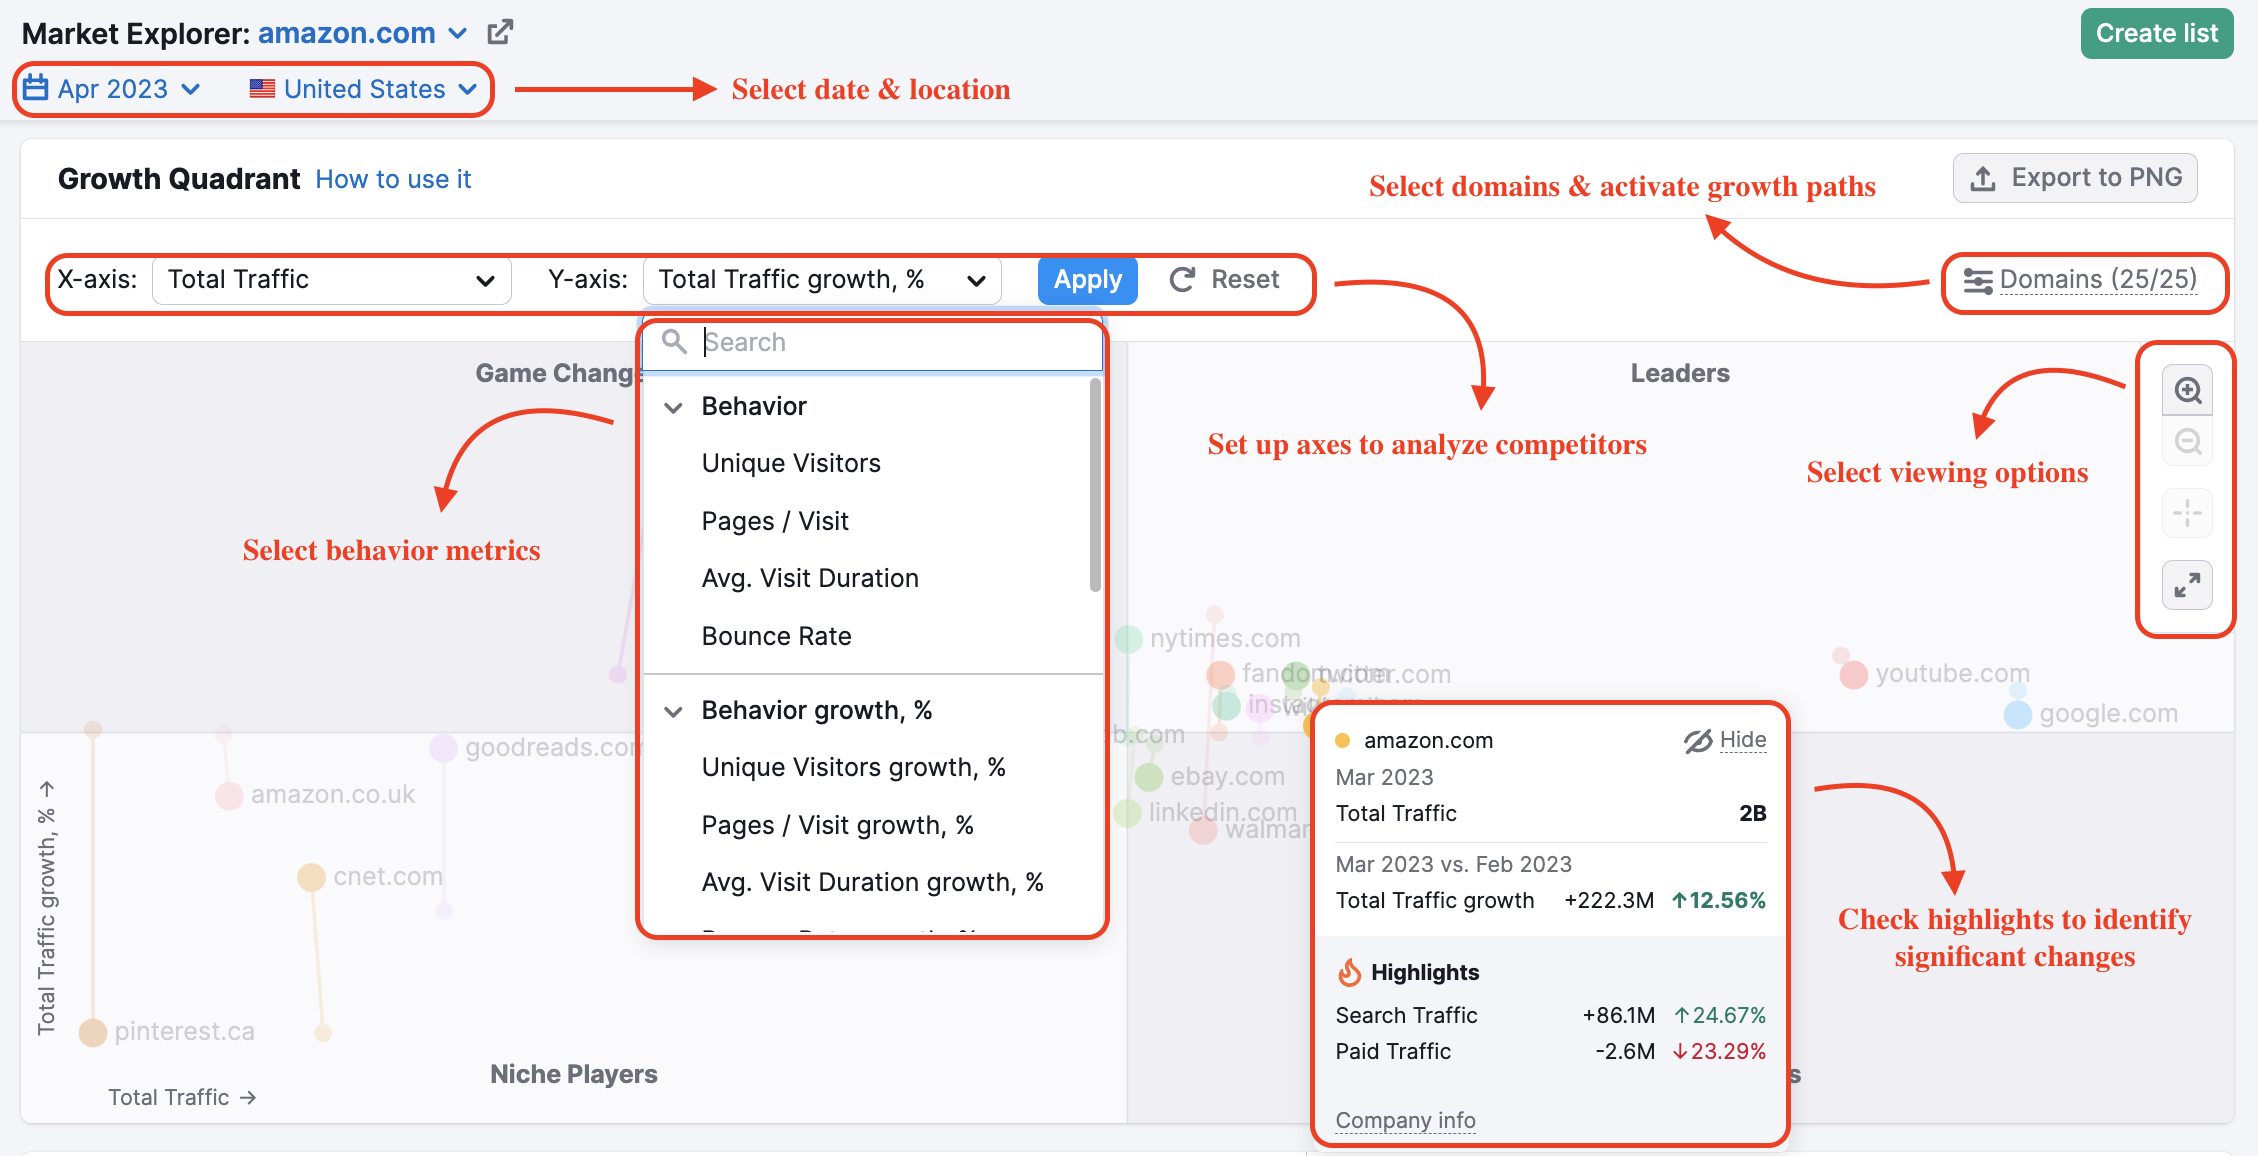 Growth Quadrant widget in Market Explorer and filters you can use in it.